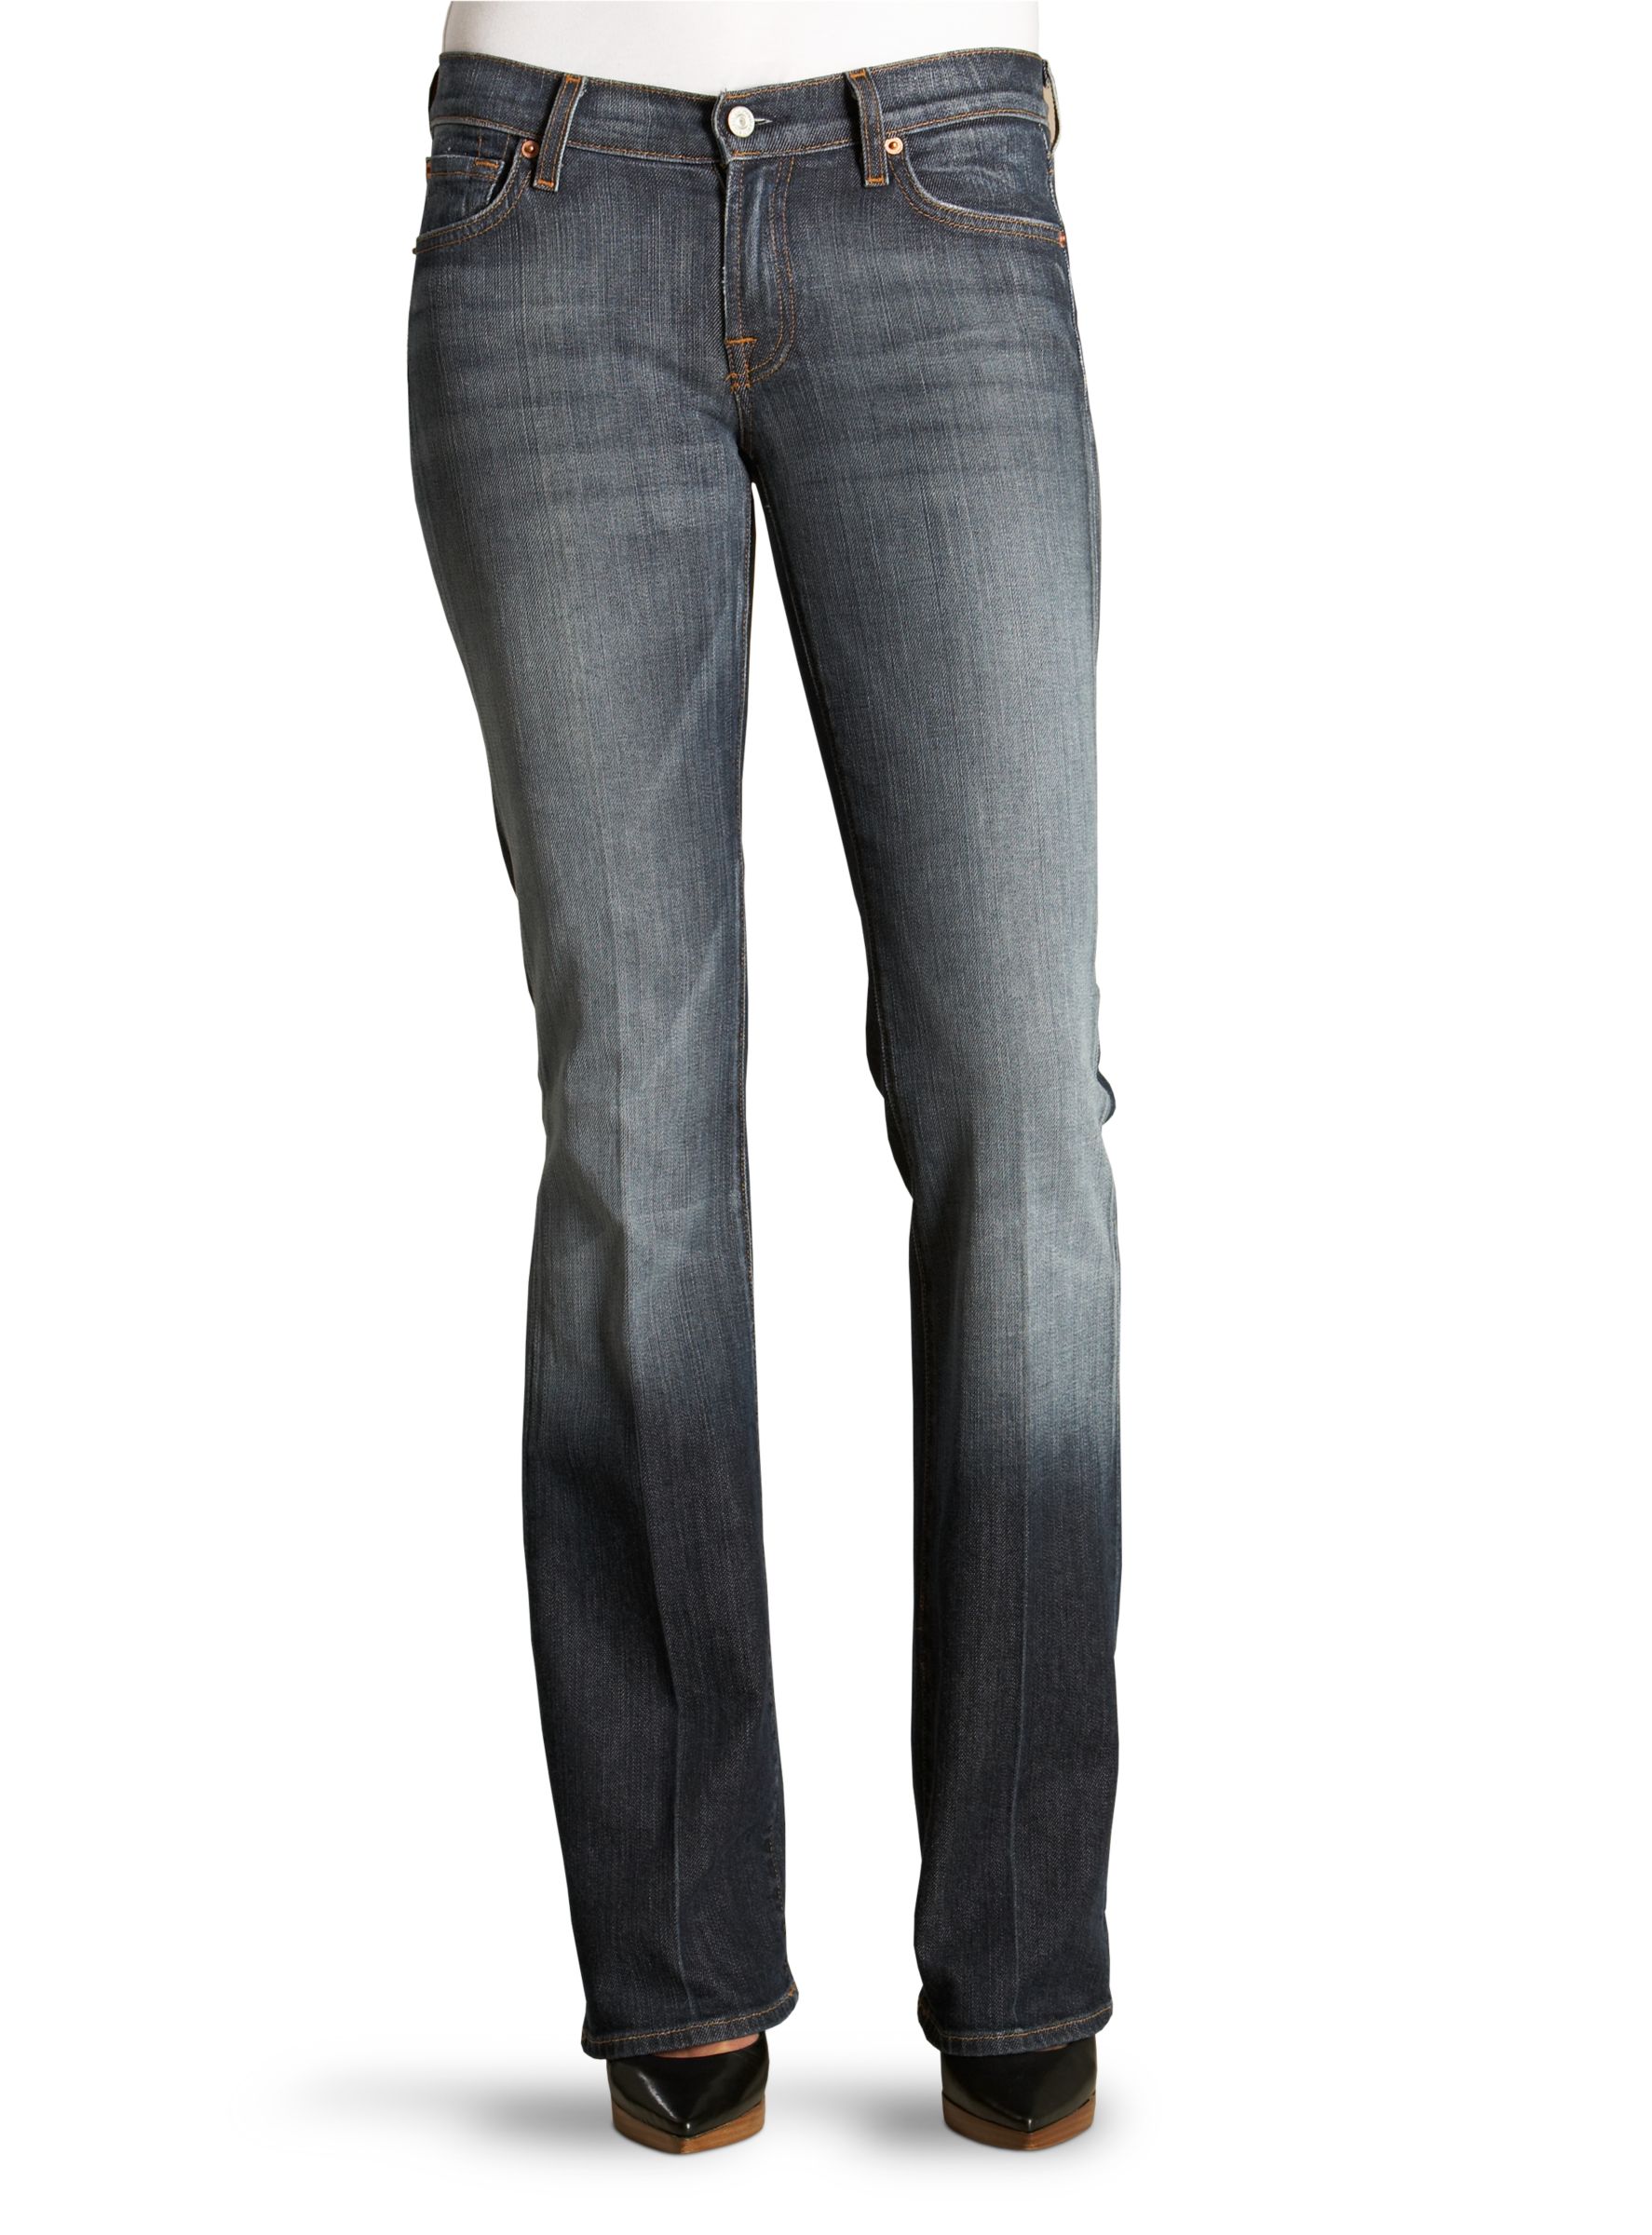 7 For All Mankind Boot Cut Jeans, New York Dark at John Lewis